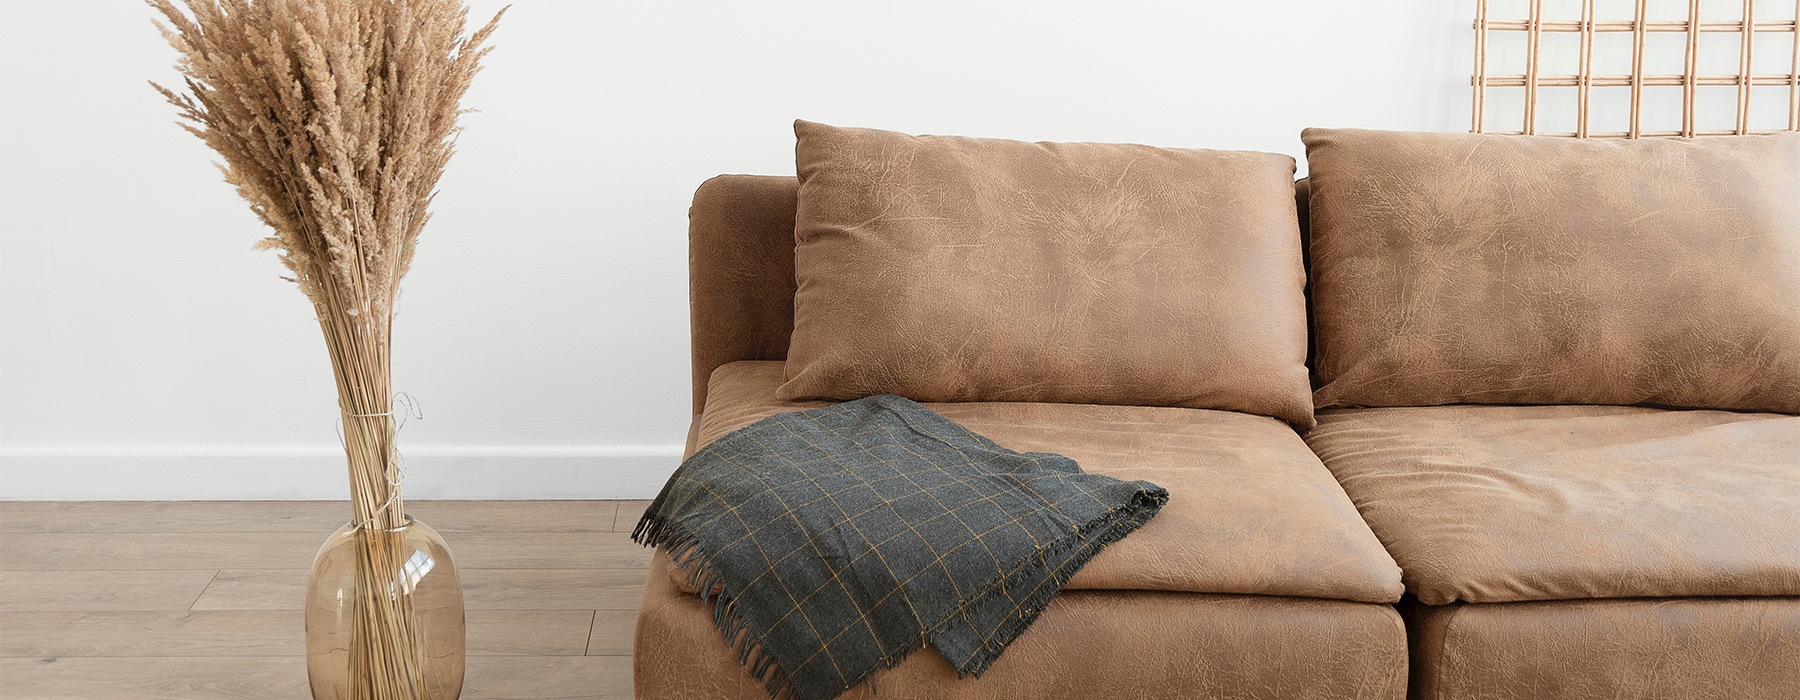 stock image of couch